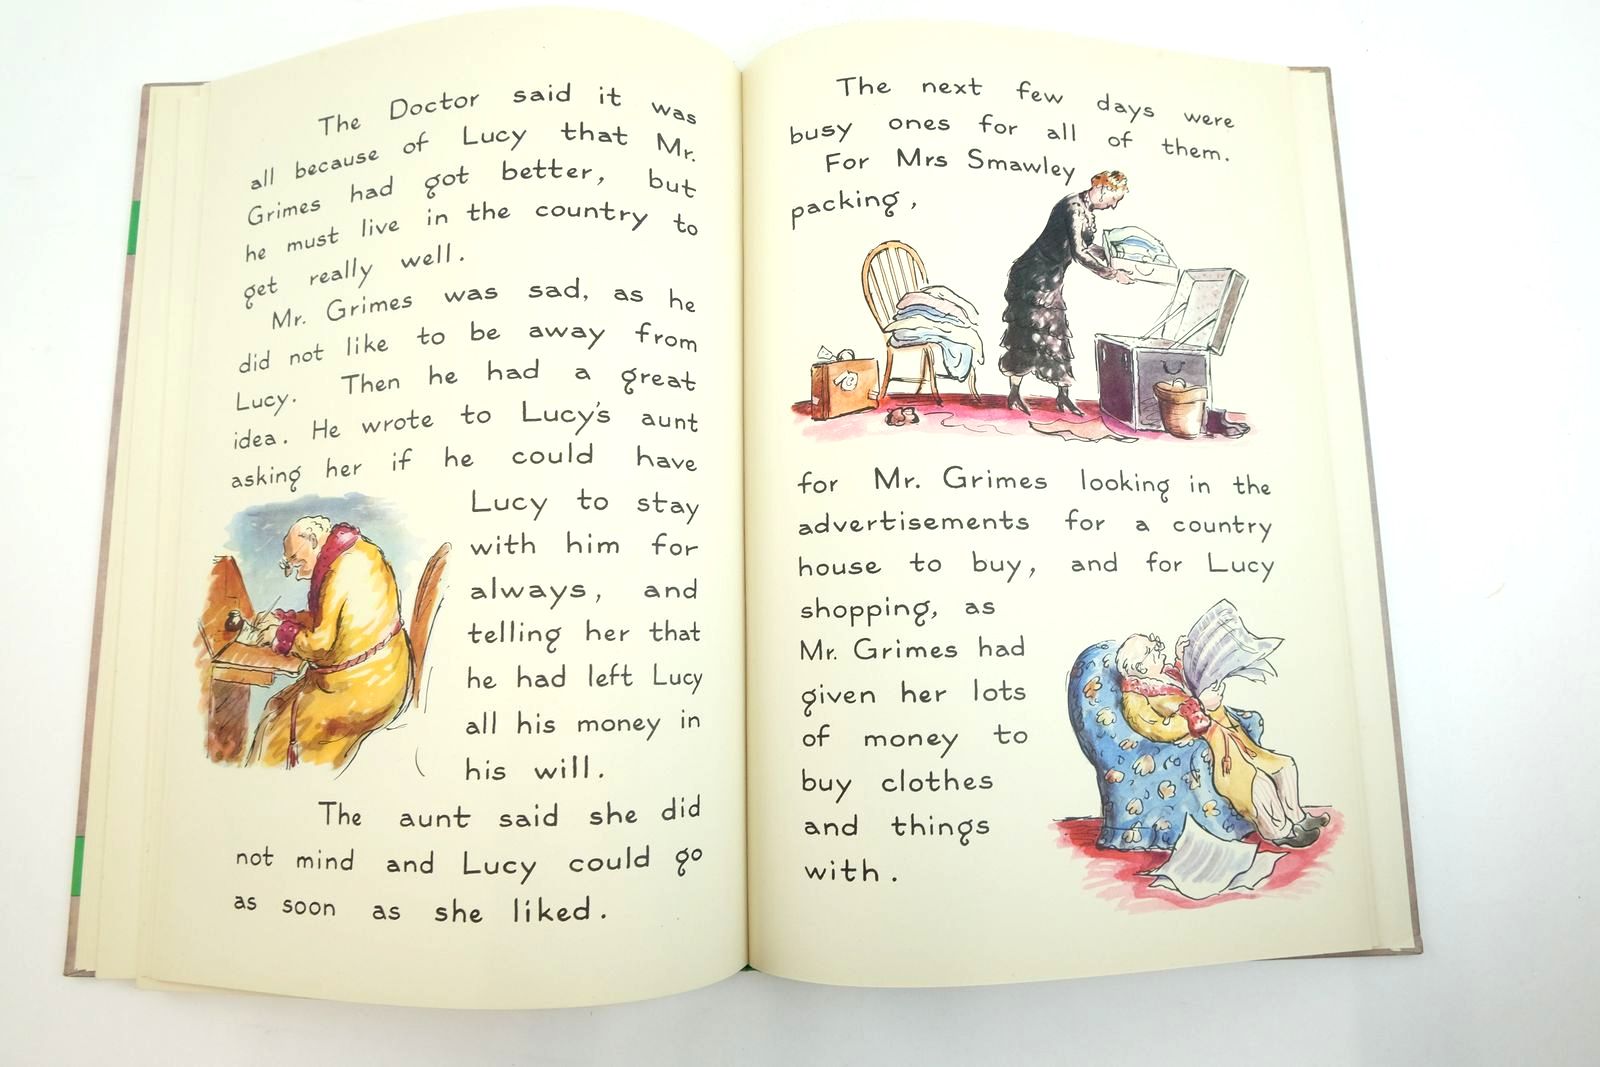 Photo of LUCY BROWN AND MR. GRIMES written by Ardizzone, Edward illustrated by Ardizzone, Edward published by Oxford University Press (STOCK CODE: 2134789)  for sale by Stella & Rose's Books